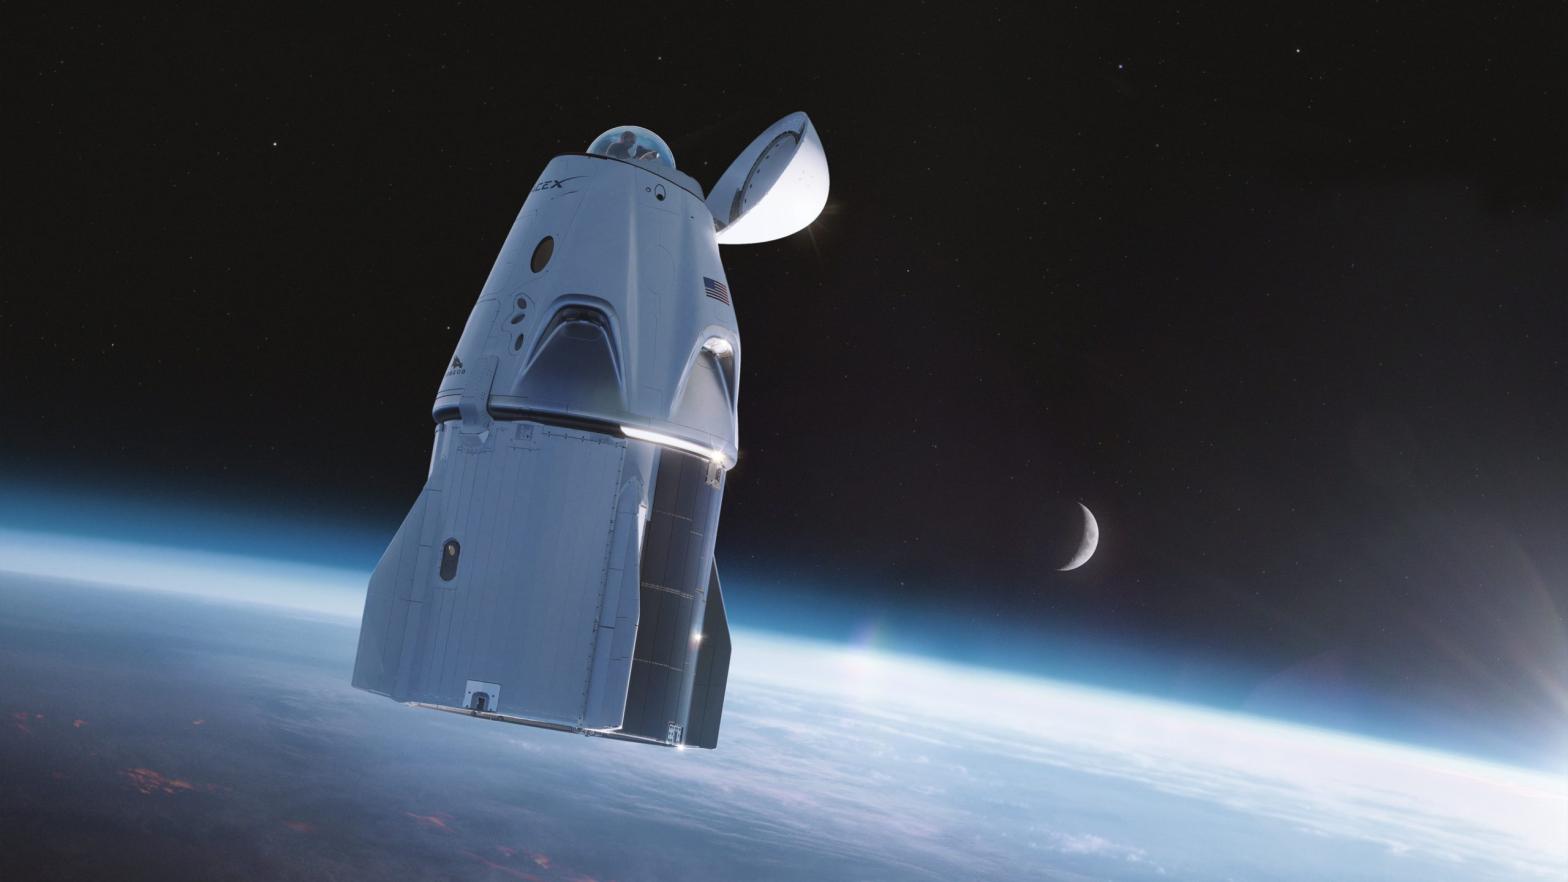 Artist's rendering of the Crew Dragon in orbit, with window dome open.  (Image: Inspiration4/SpaceX)